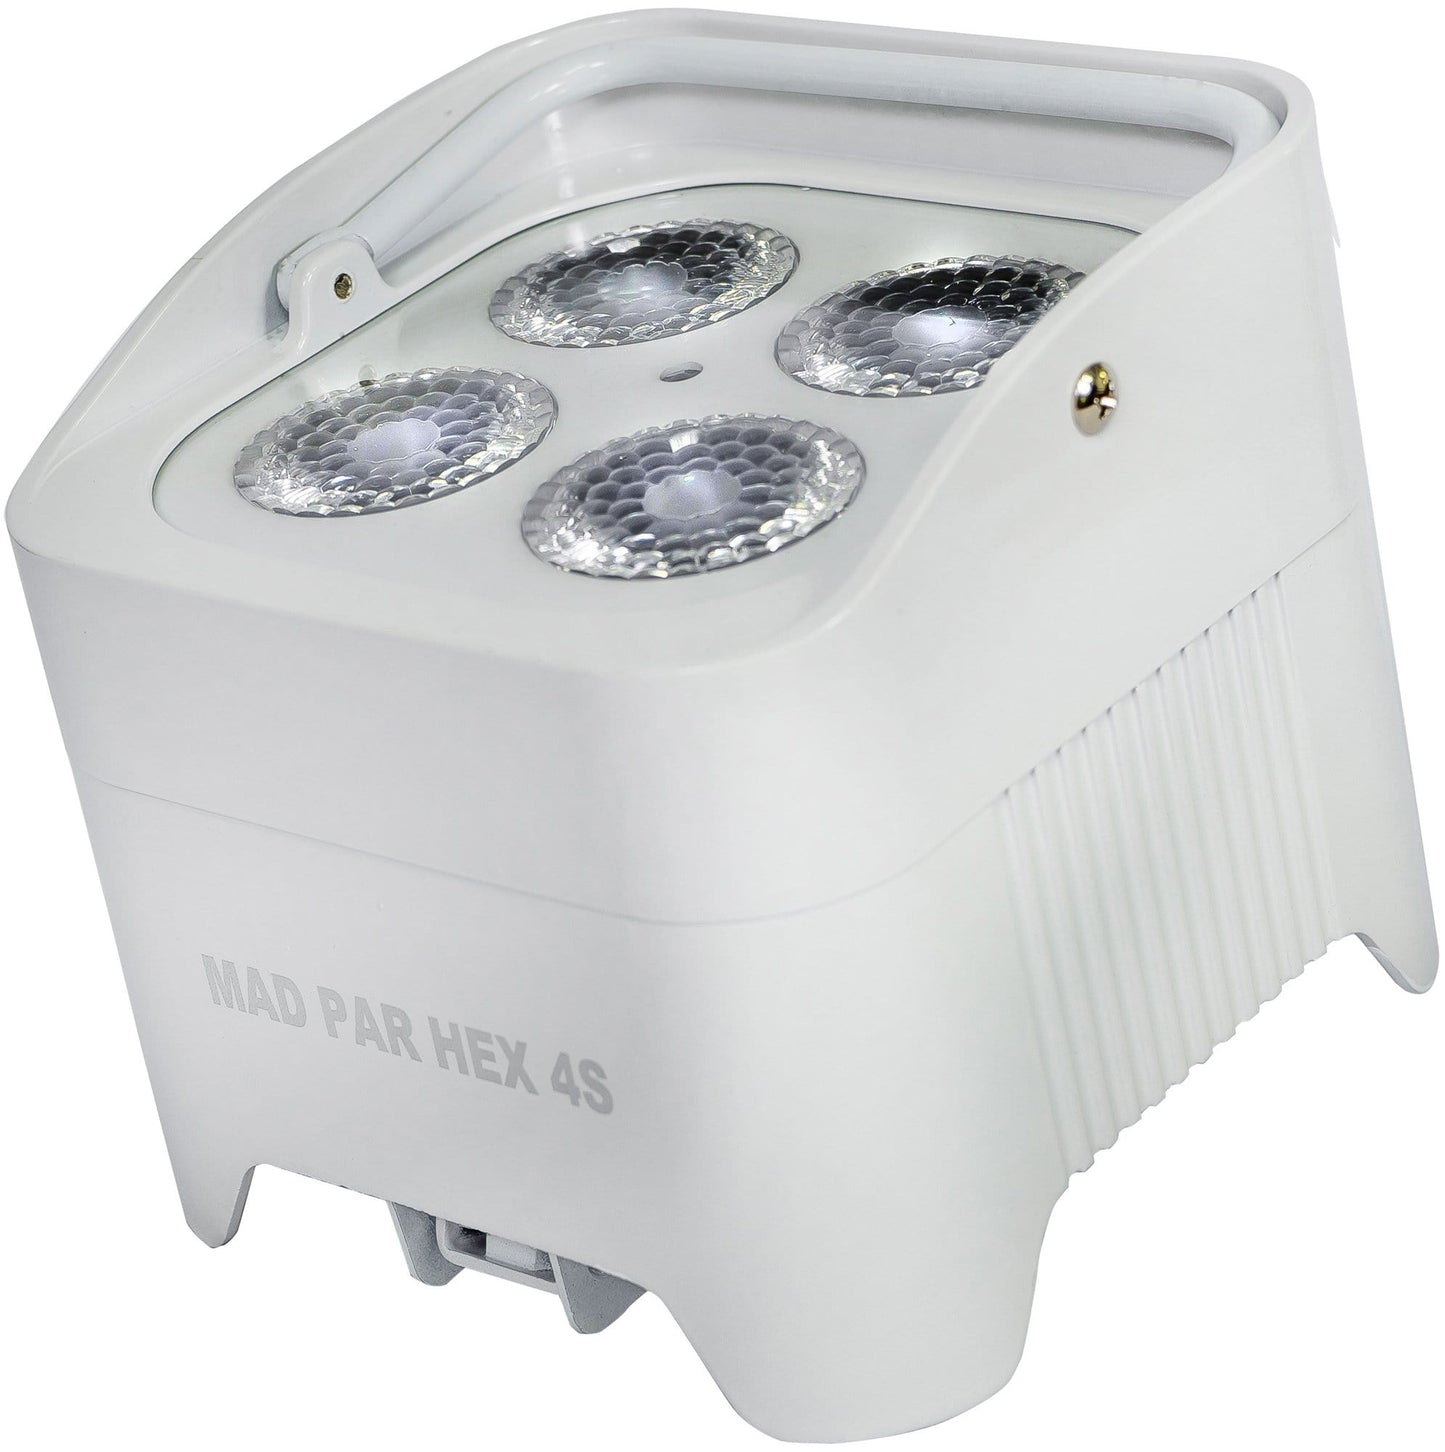 JMAZ Mad Par HEX 4S Battery Powered LED in White - ProSound and Stage Lighting